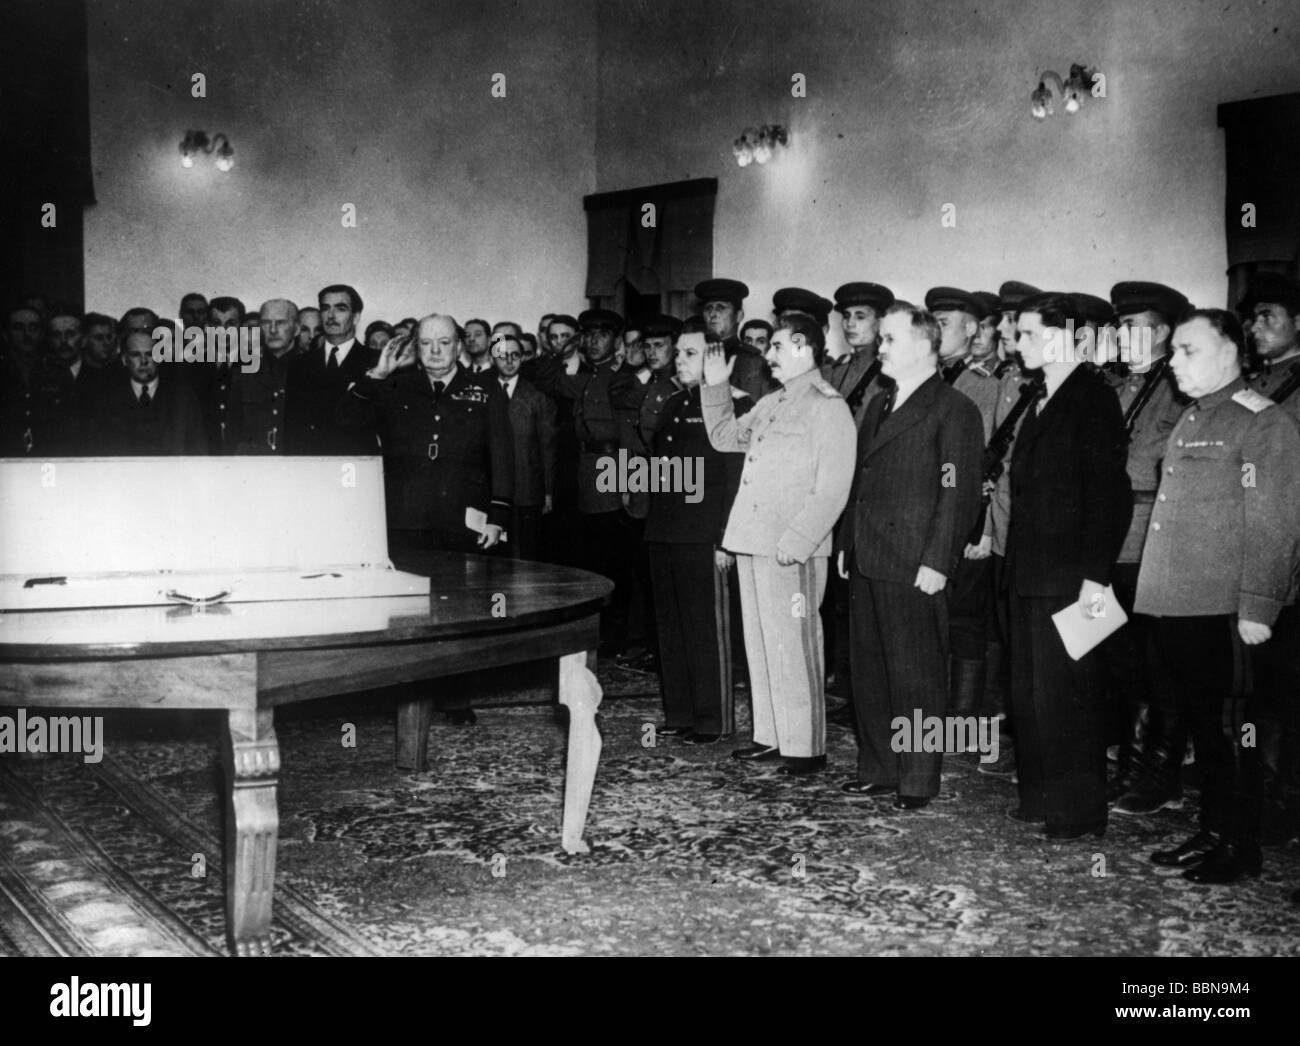 events, Second World War / WWII, conferences, Tehran Conference, 28.11.1943 - 1.12.1943, presentation of the 'Stalingrad Sword' to the Russians, Winston Churchill and Joseph Stalin during the ceremony, 29.11.1943, Stock Photo